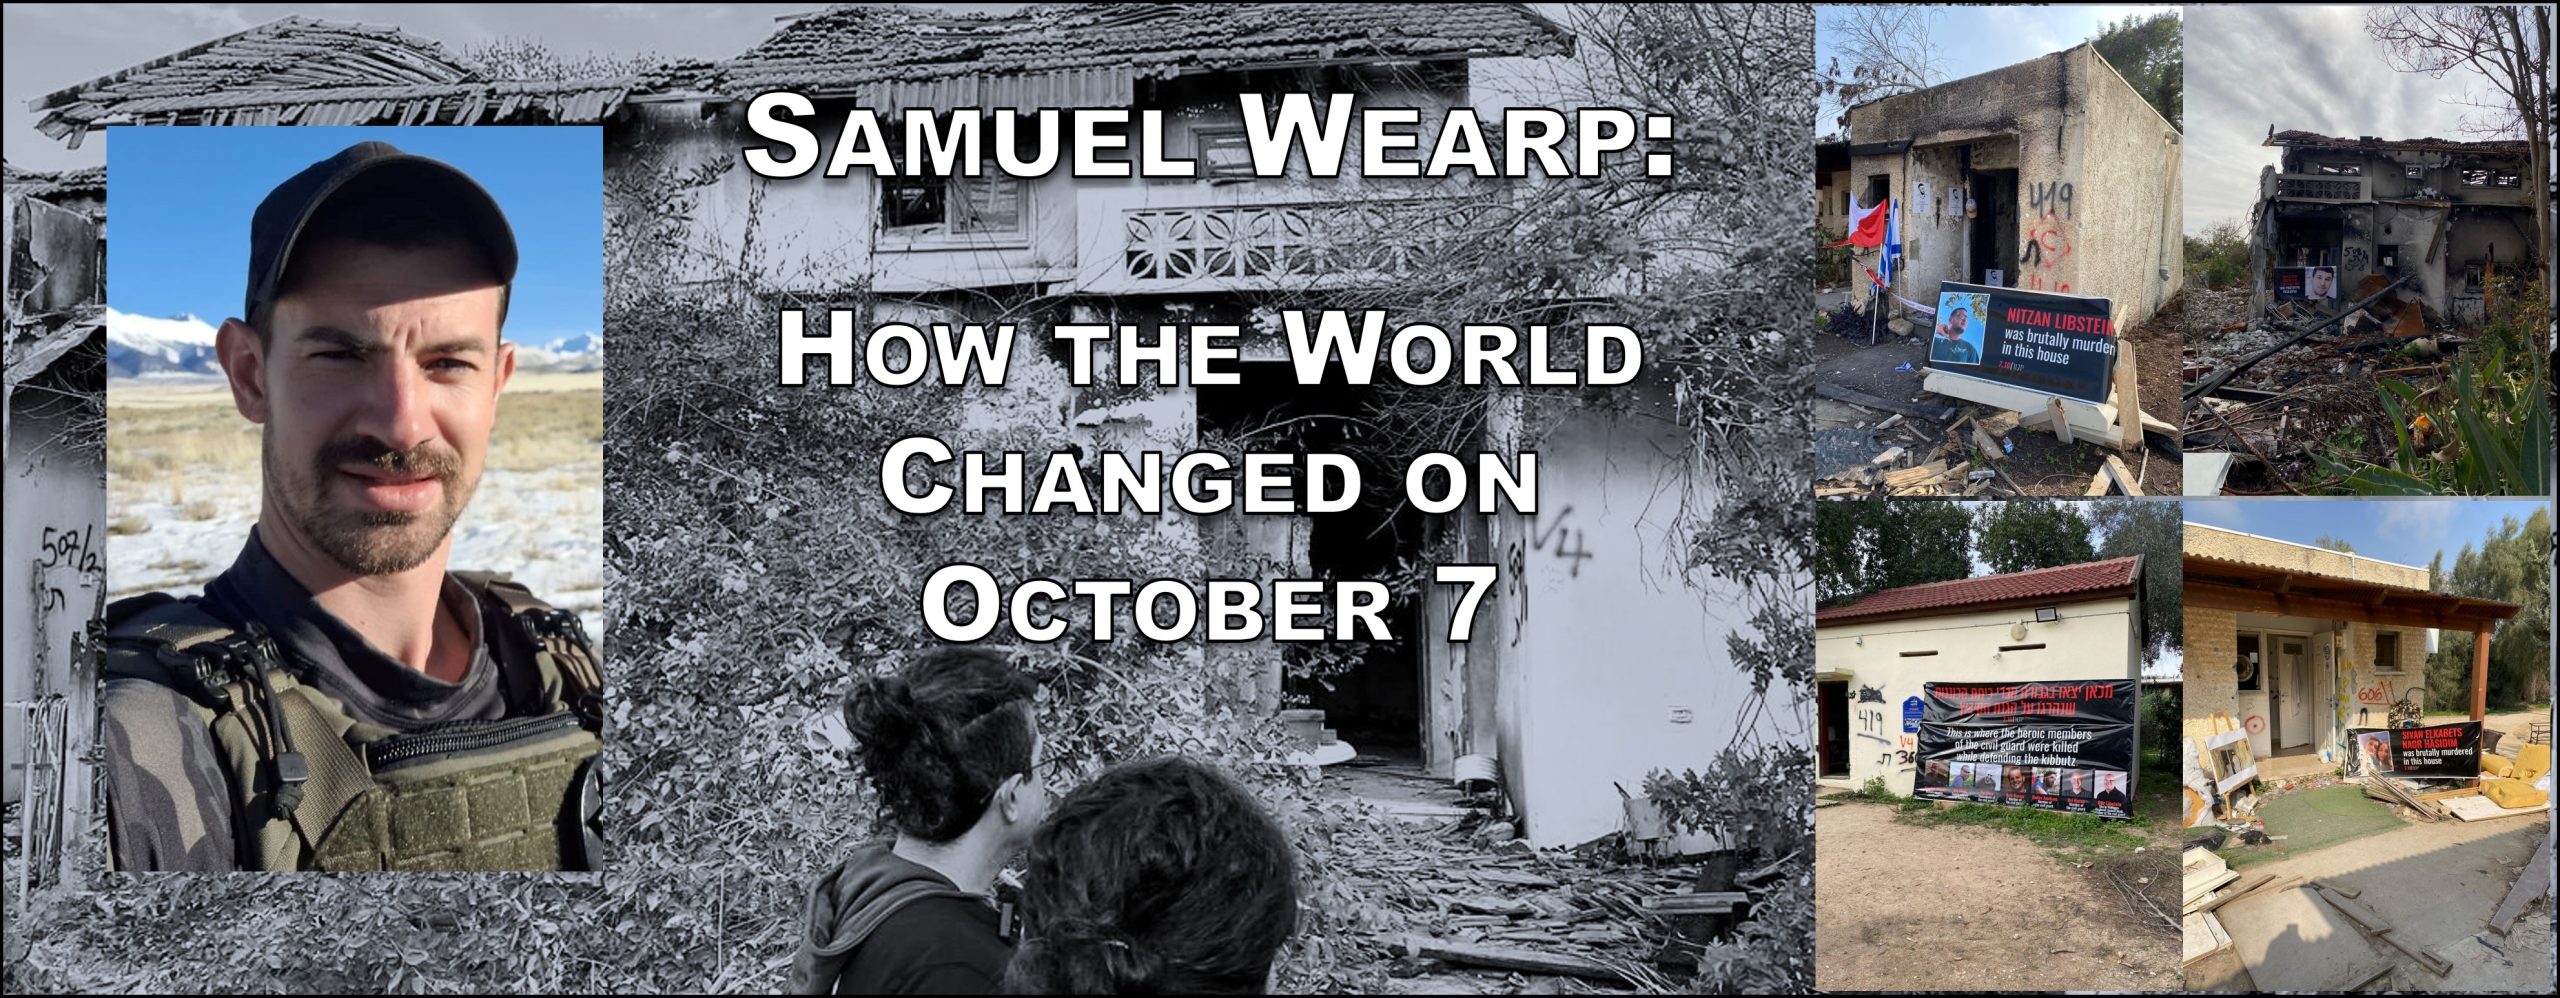 Samuel Wearp: How the World Changed on October 7, part 1 - The Barking Fox